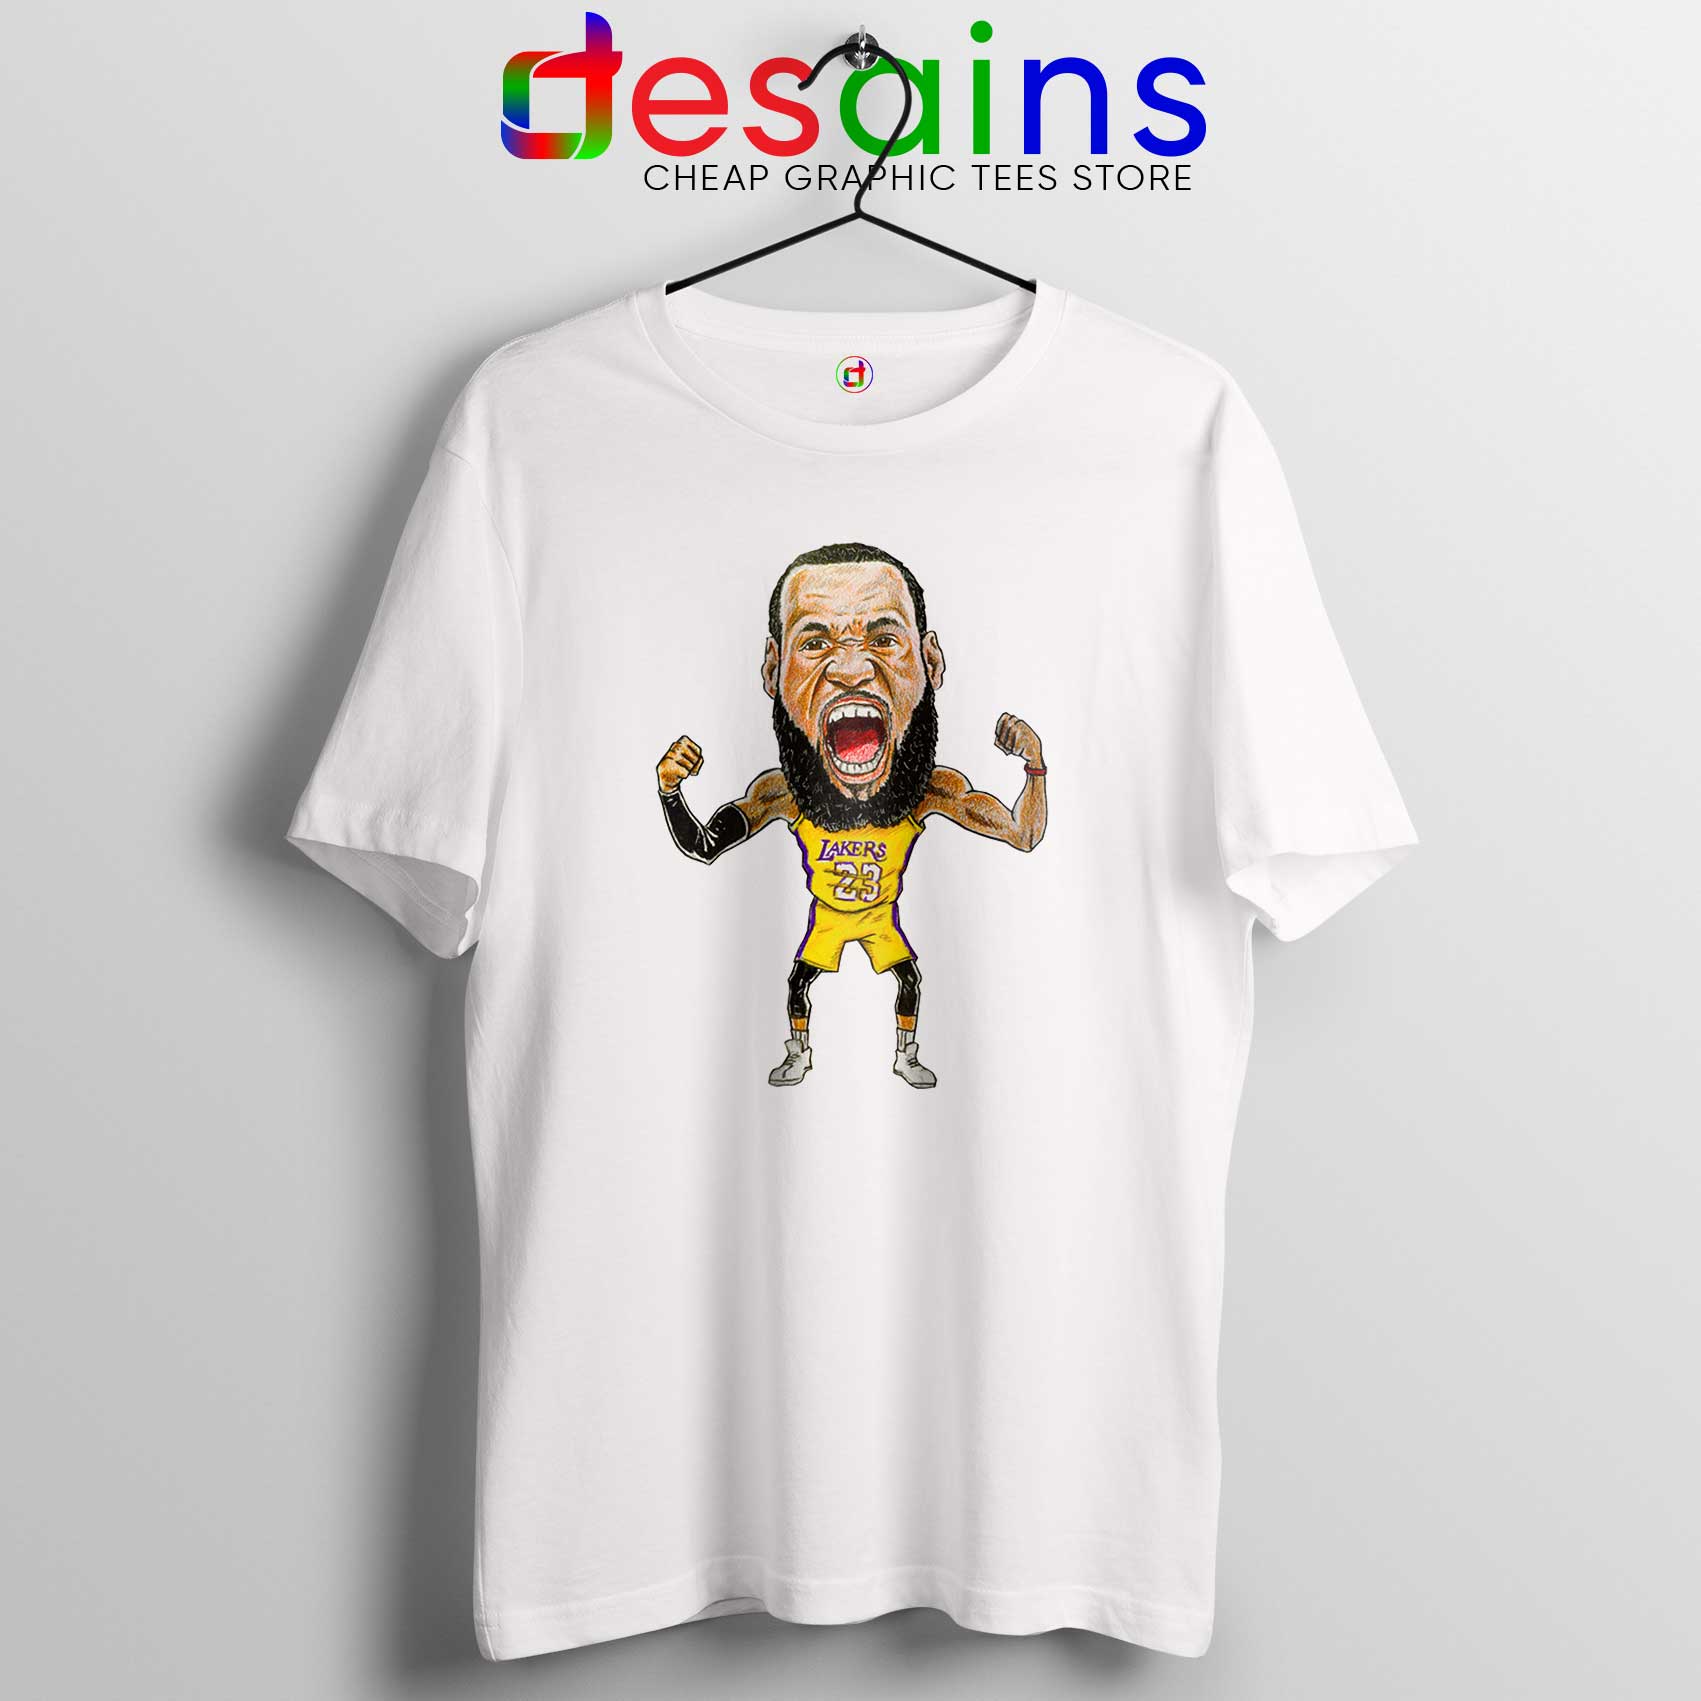 lebron james t shirts for sale